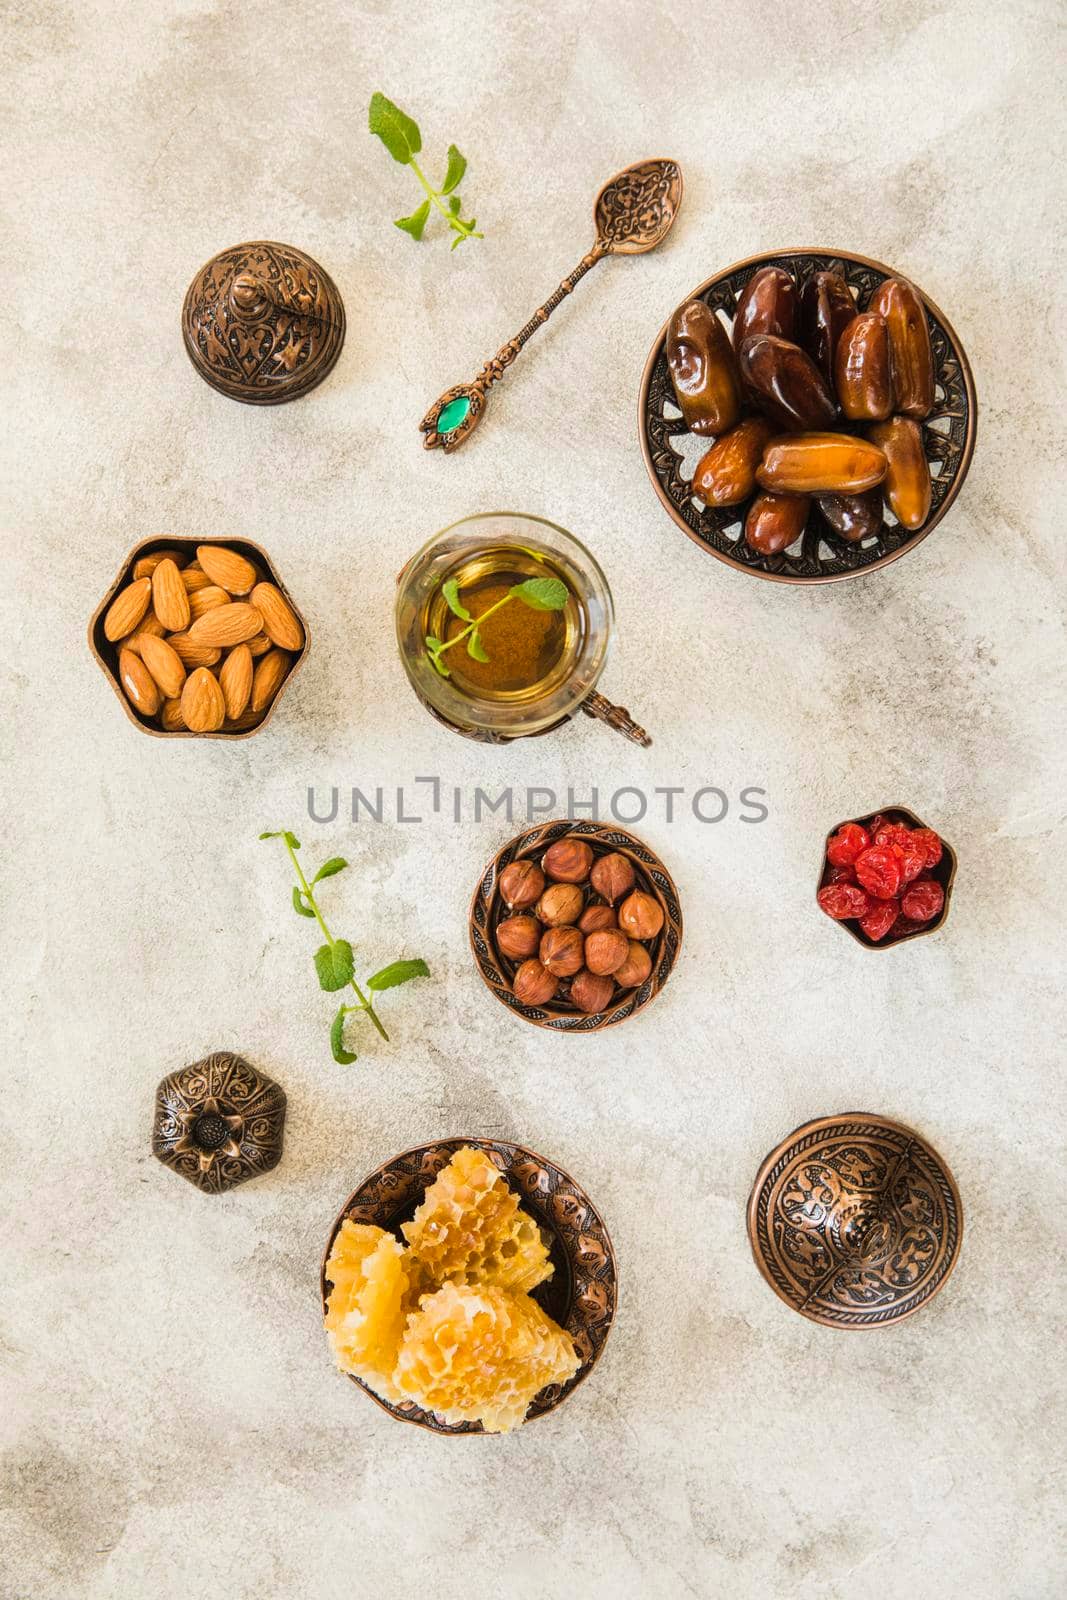 tea glass with dates fruit nuts table. High quality photo by Zahard